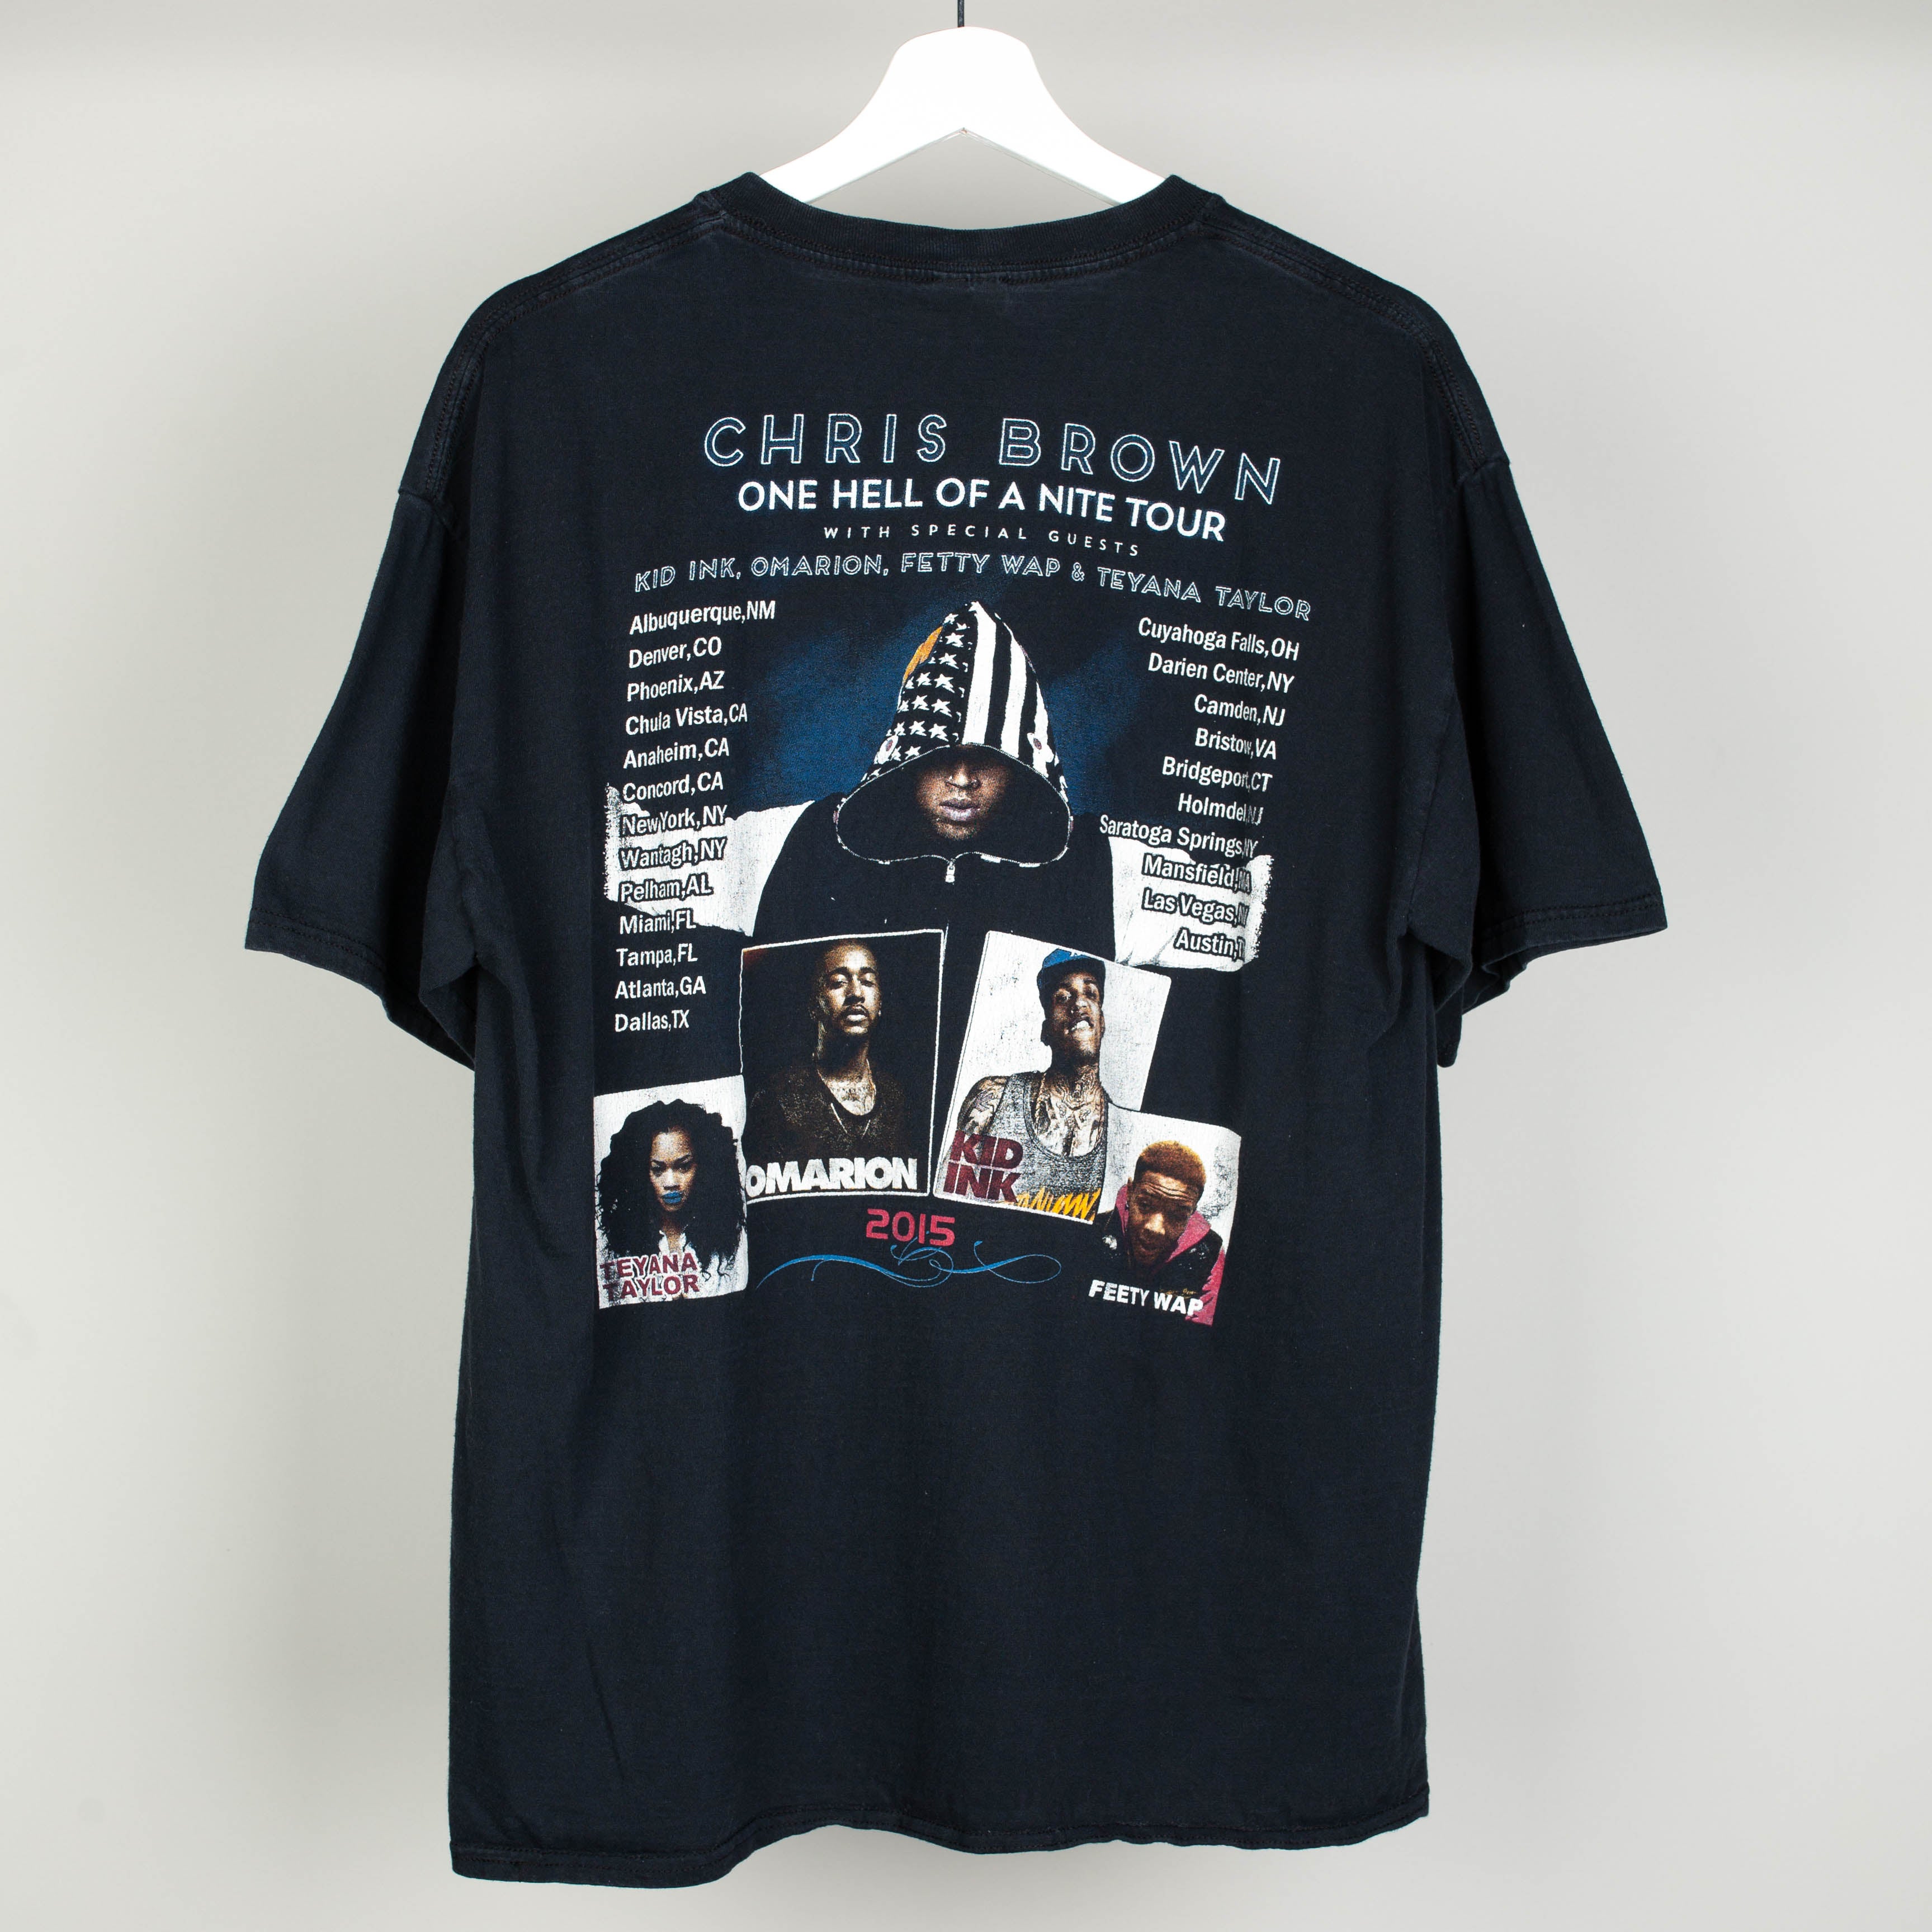 2015 Chris Brown One Hell of A Night Tour T-Shirt Size M